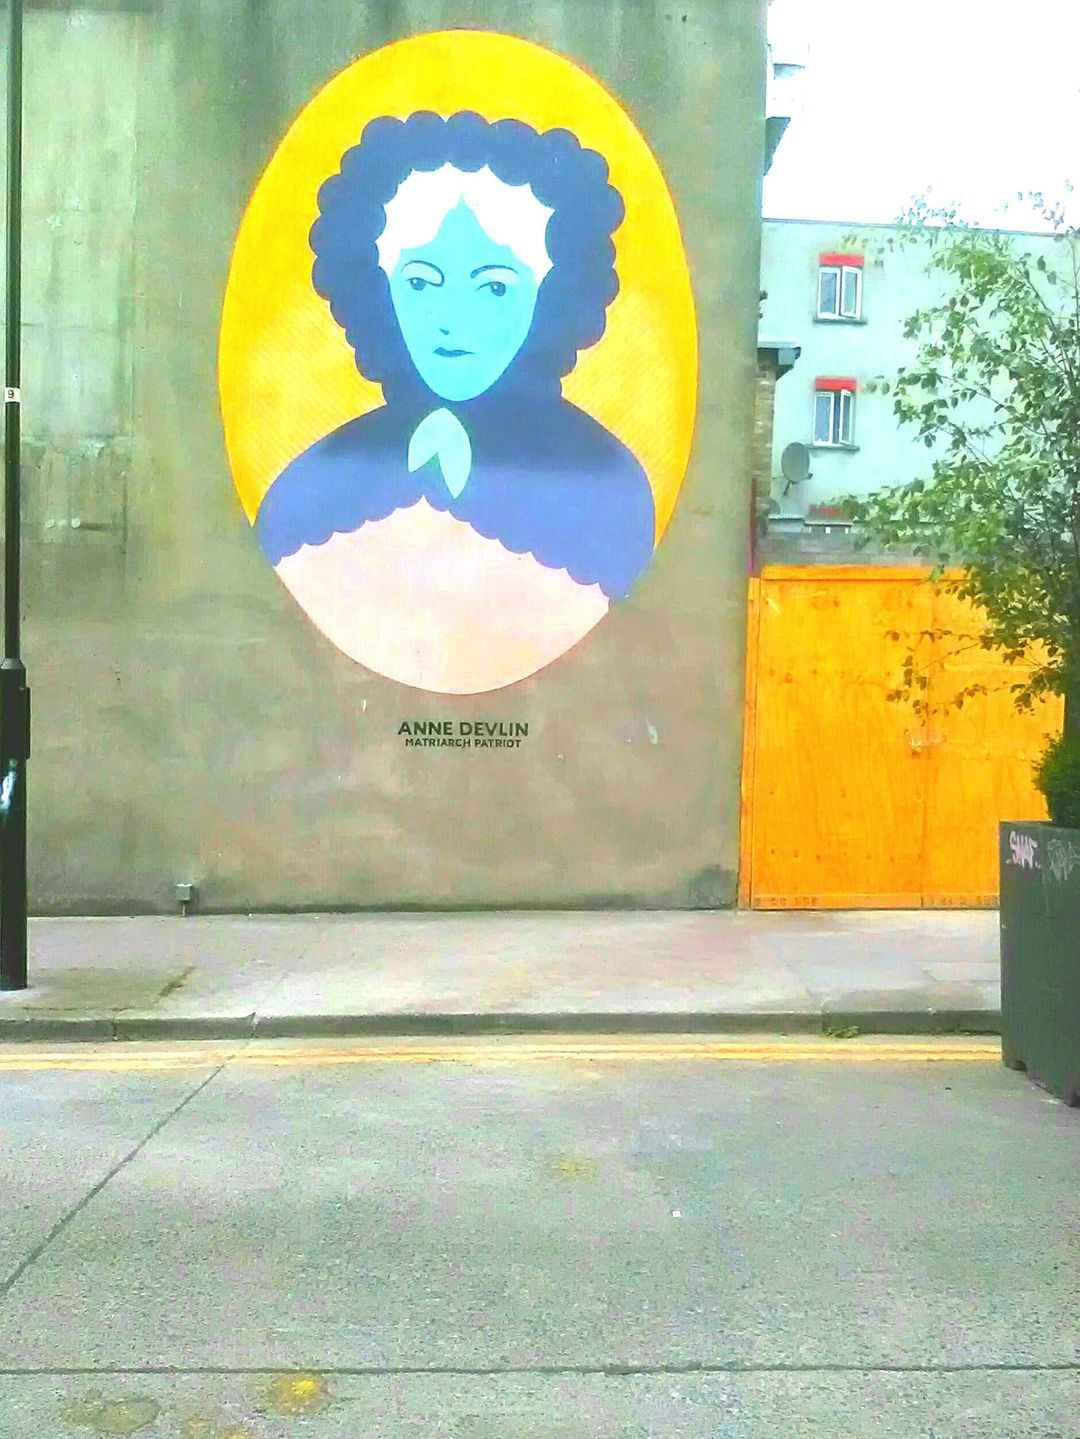 (Photo:) Mural commemorating the life of Anne Devlin